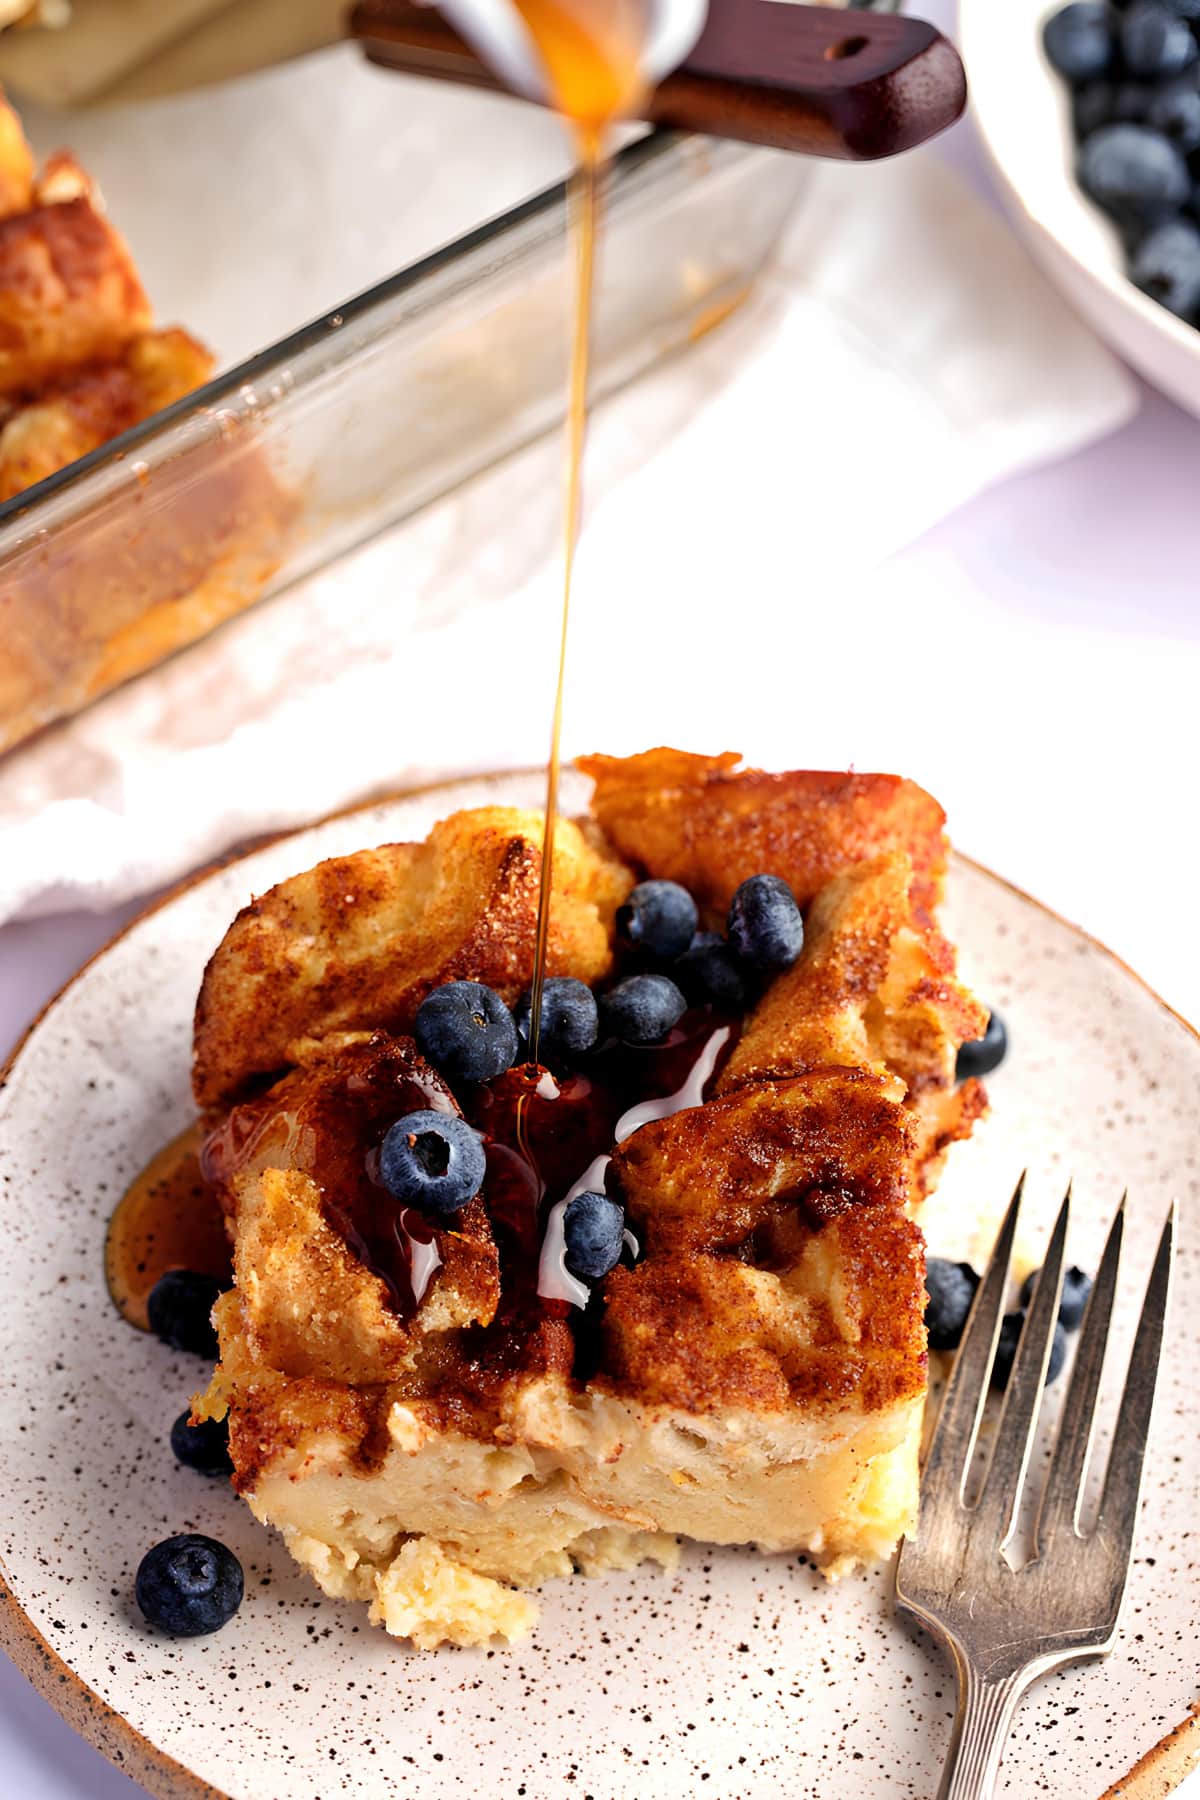 Dripping Syrup into a Sliced French Toast with Blueberries